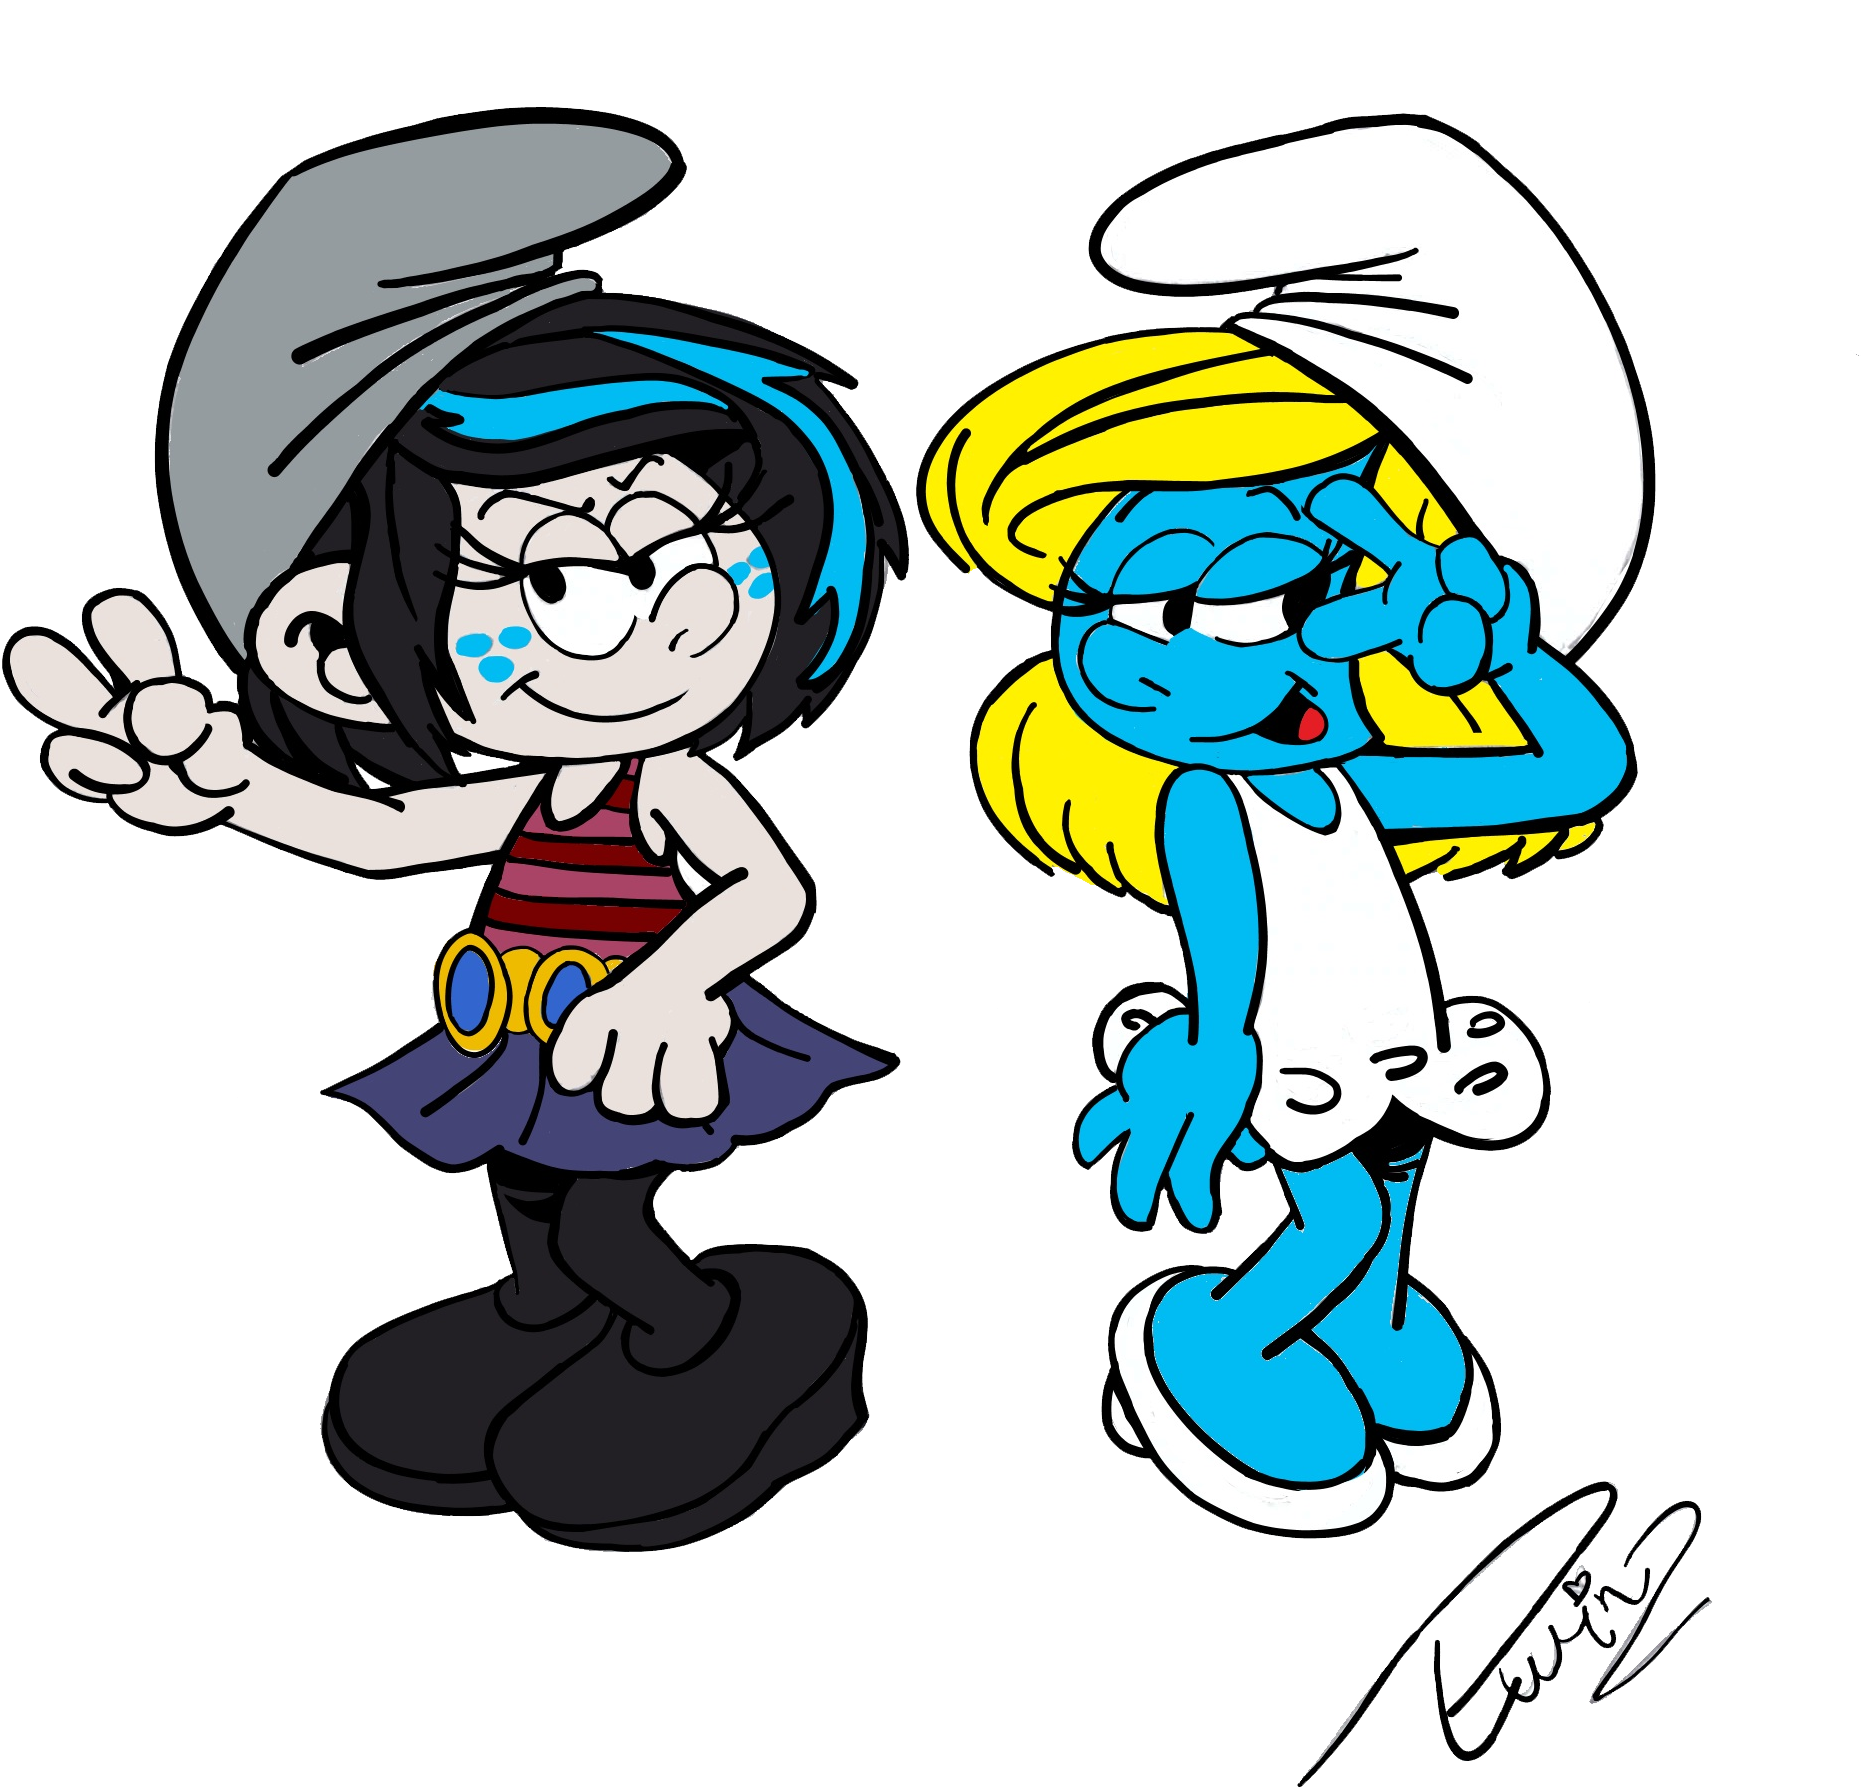 Vexy And Smurfette Whit New Haircut By Cjtwins On Deviantart - Vexy (2012x1920)